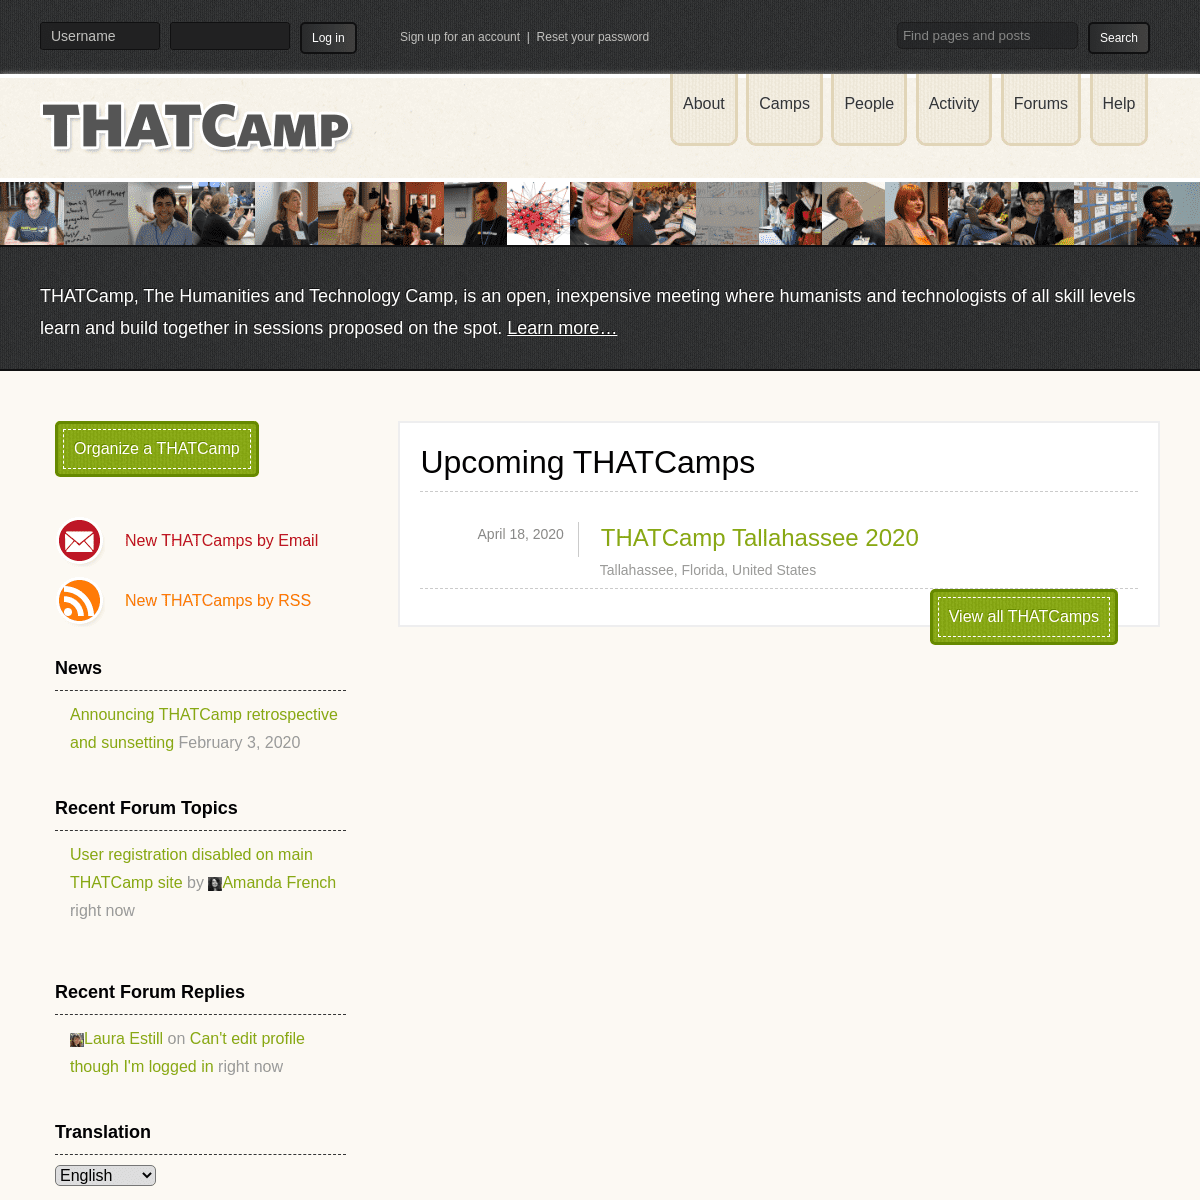 A complete backup of https://thatcamp.org